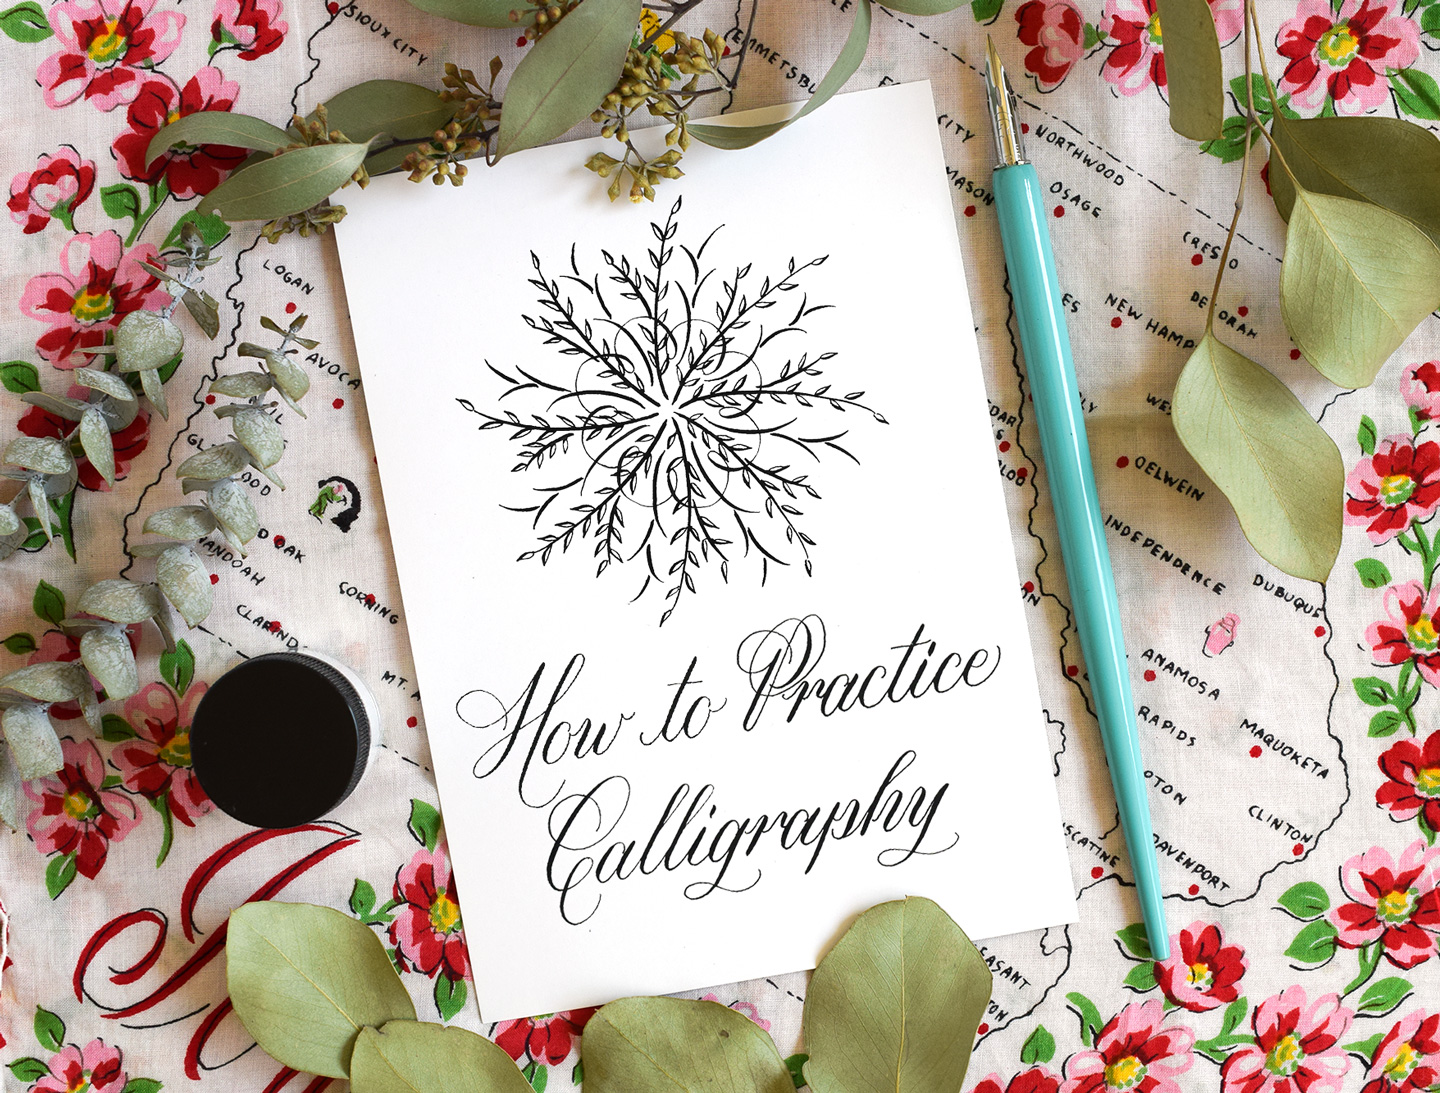 How to Practice Calligraphy